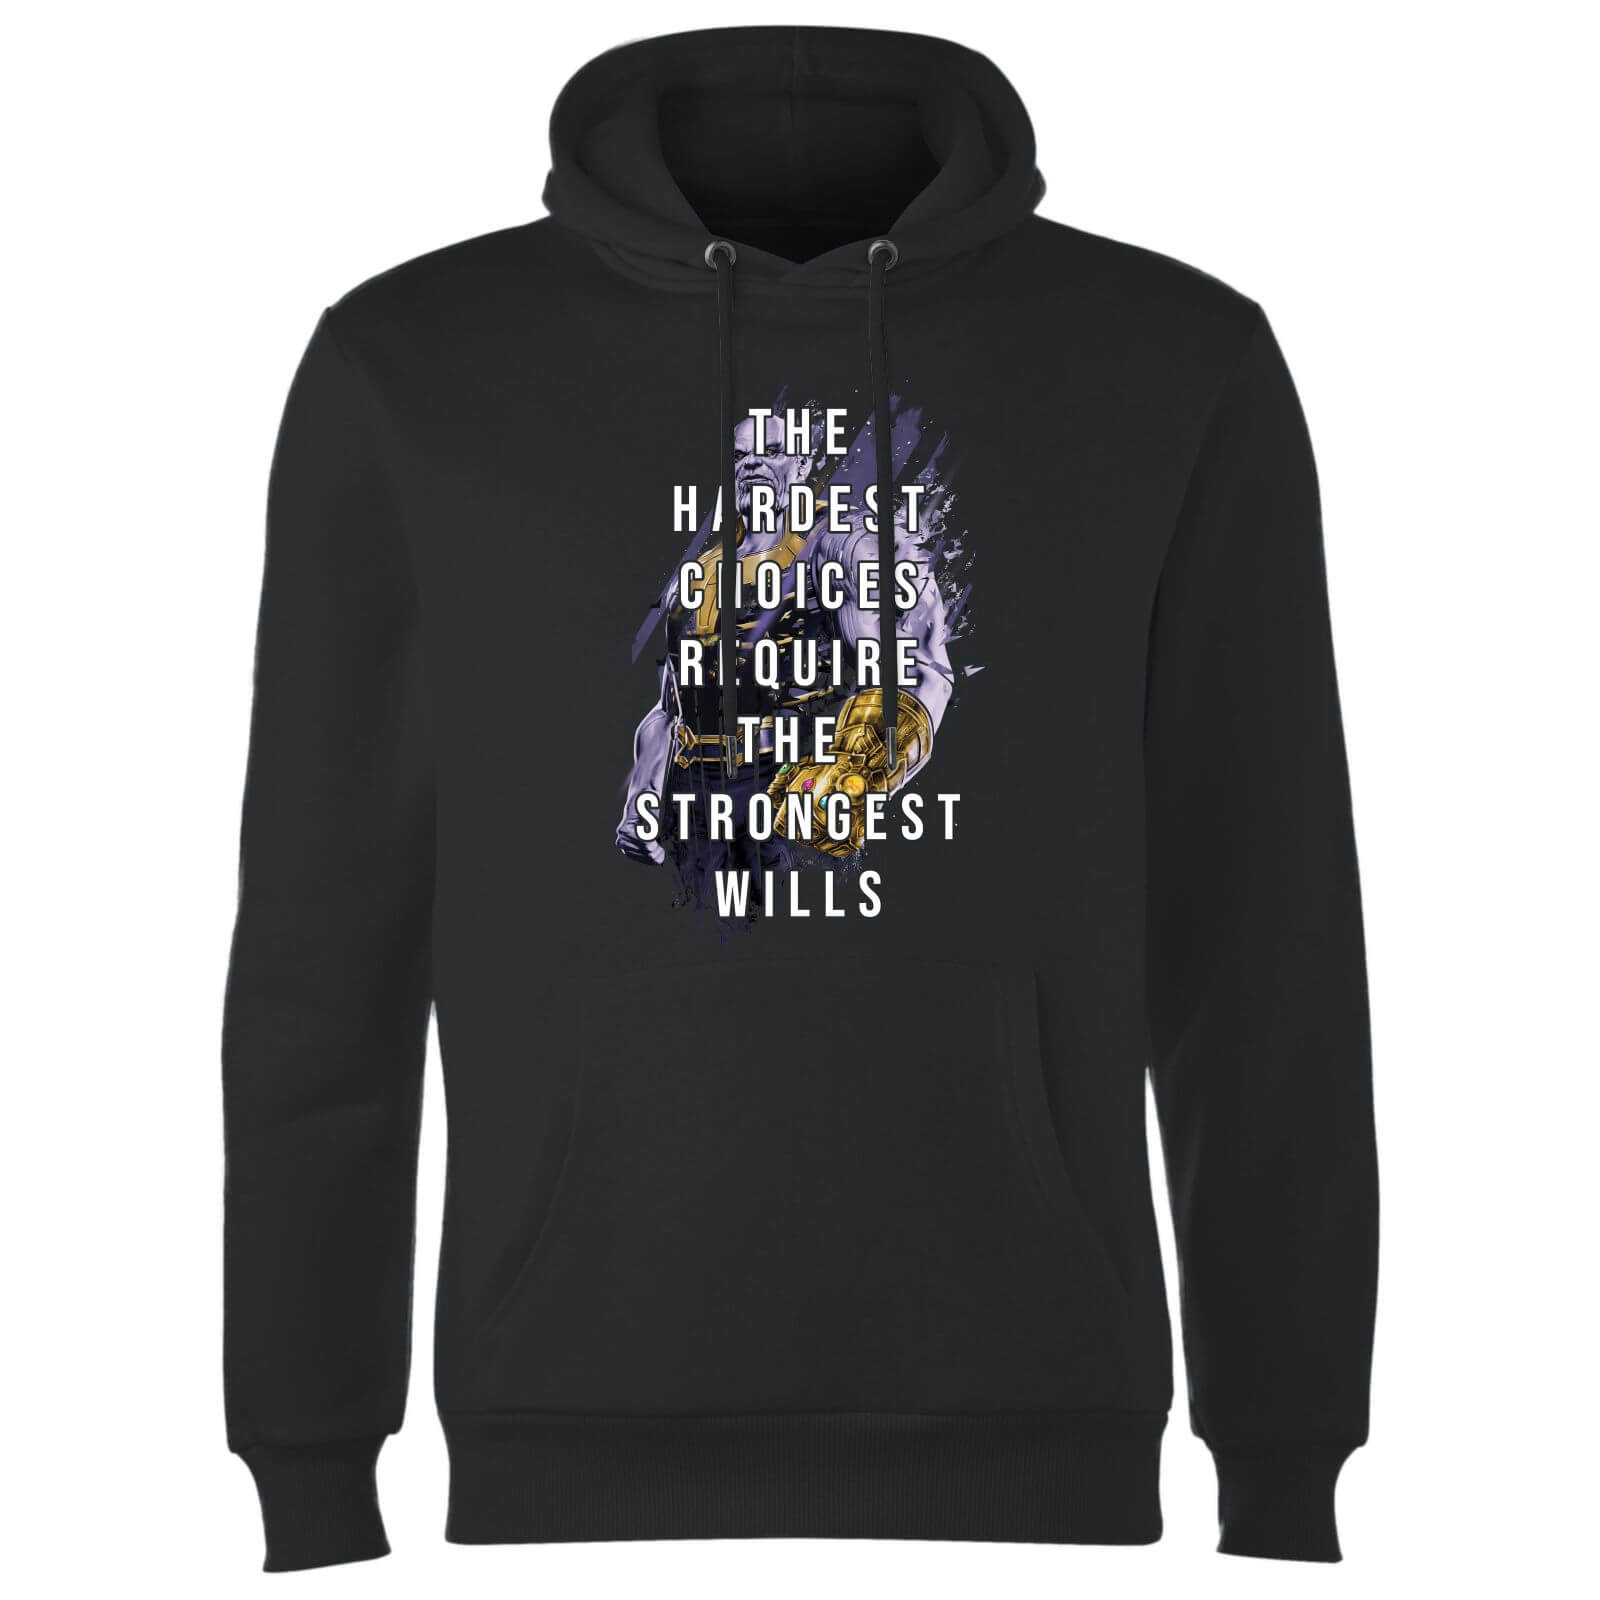 Avengers The Strongest Will Hoodie - Black - S